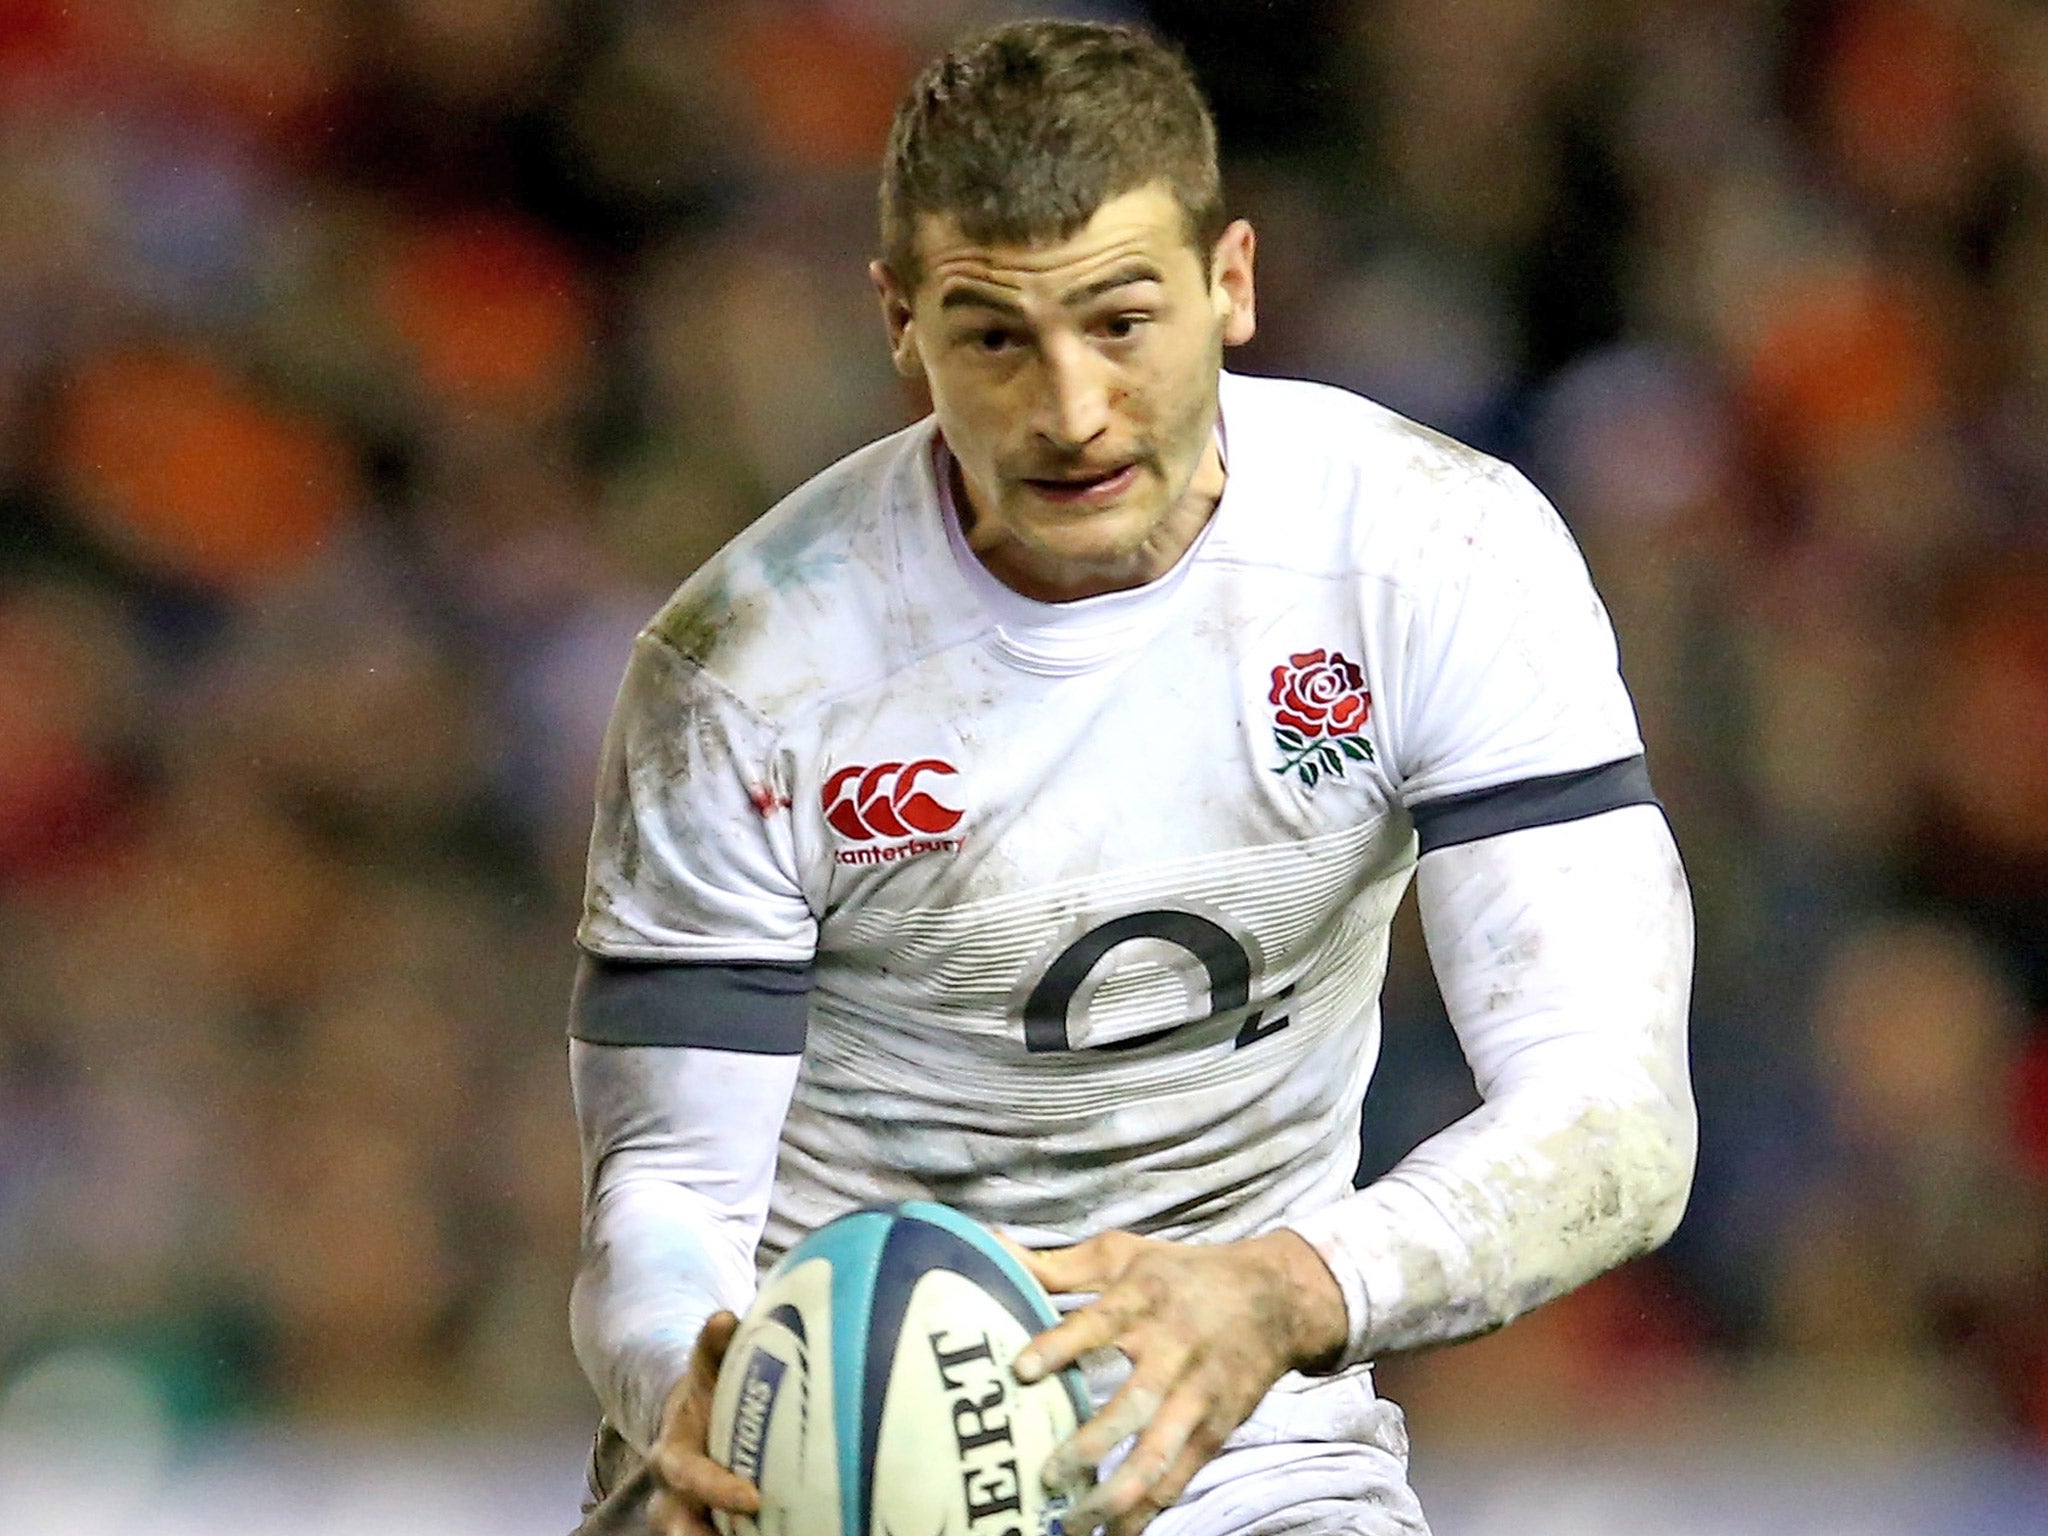 Jonny May will face competition for a World Cup spot from a variety of players